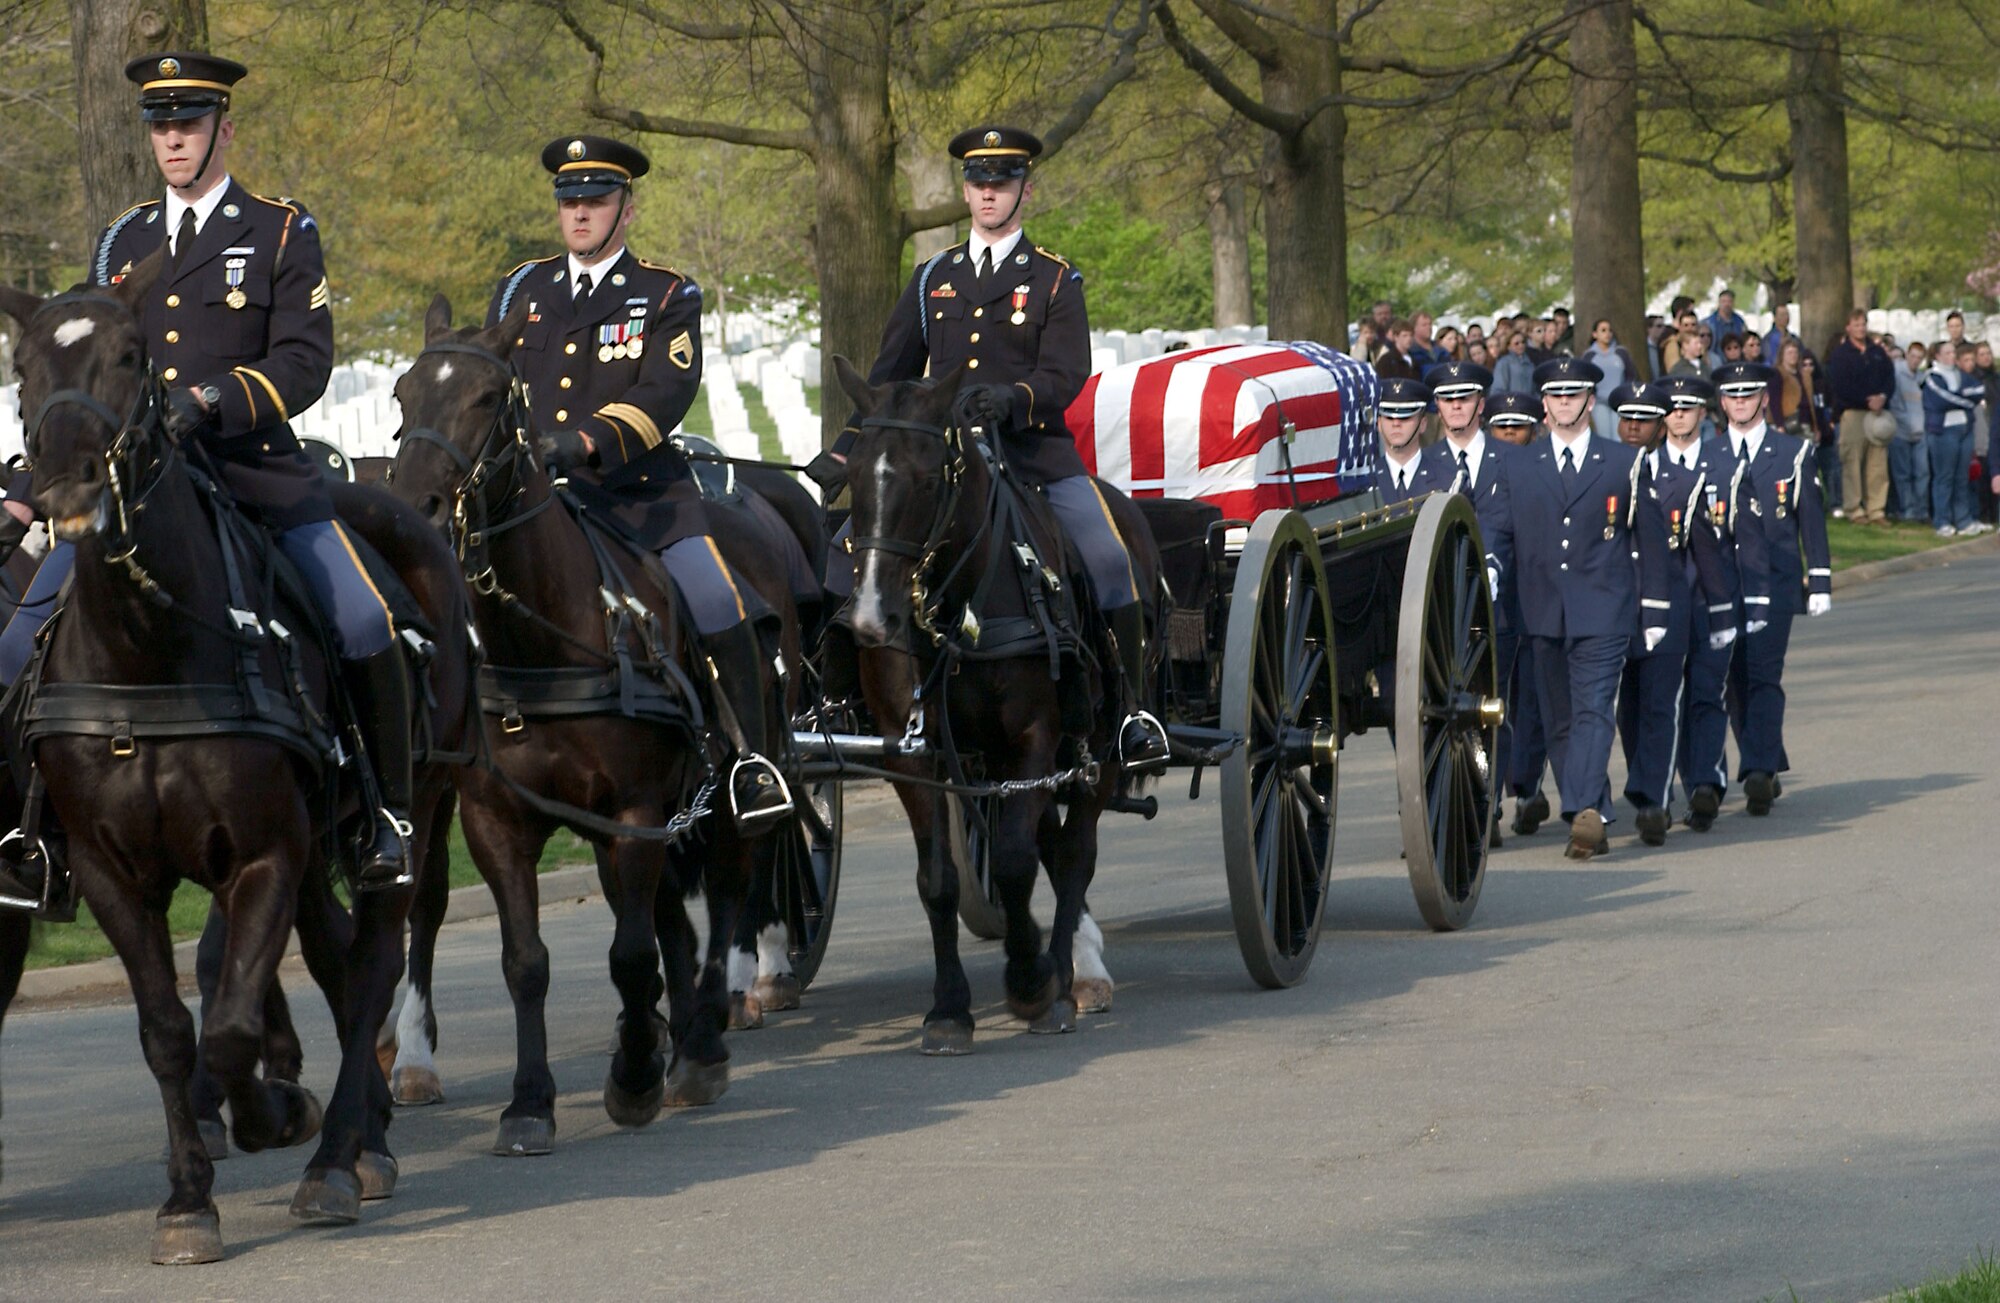 ARLINGTON, Va. (AFPN) -- The U.S. Air Force Honor Guard marches behind the caisson carrying Maj. Gregory L. Stone at Arlington National Cemetery on April 17.   Stone was the first Air Force casualty of Operation Iraqi Freedom.  He was assigned to the Idaho Air National Guard's 124th Wing.  (U.S. Air Force photo by Senior Airman Jera T. Stubblefield)